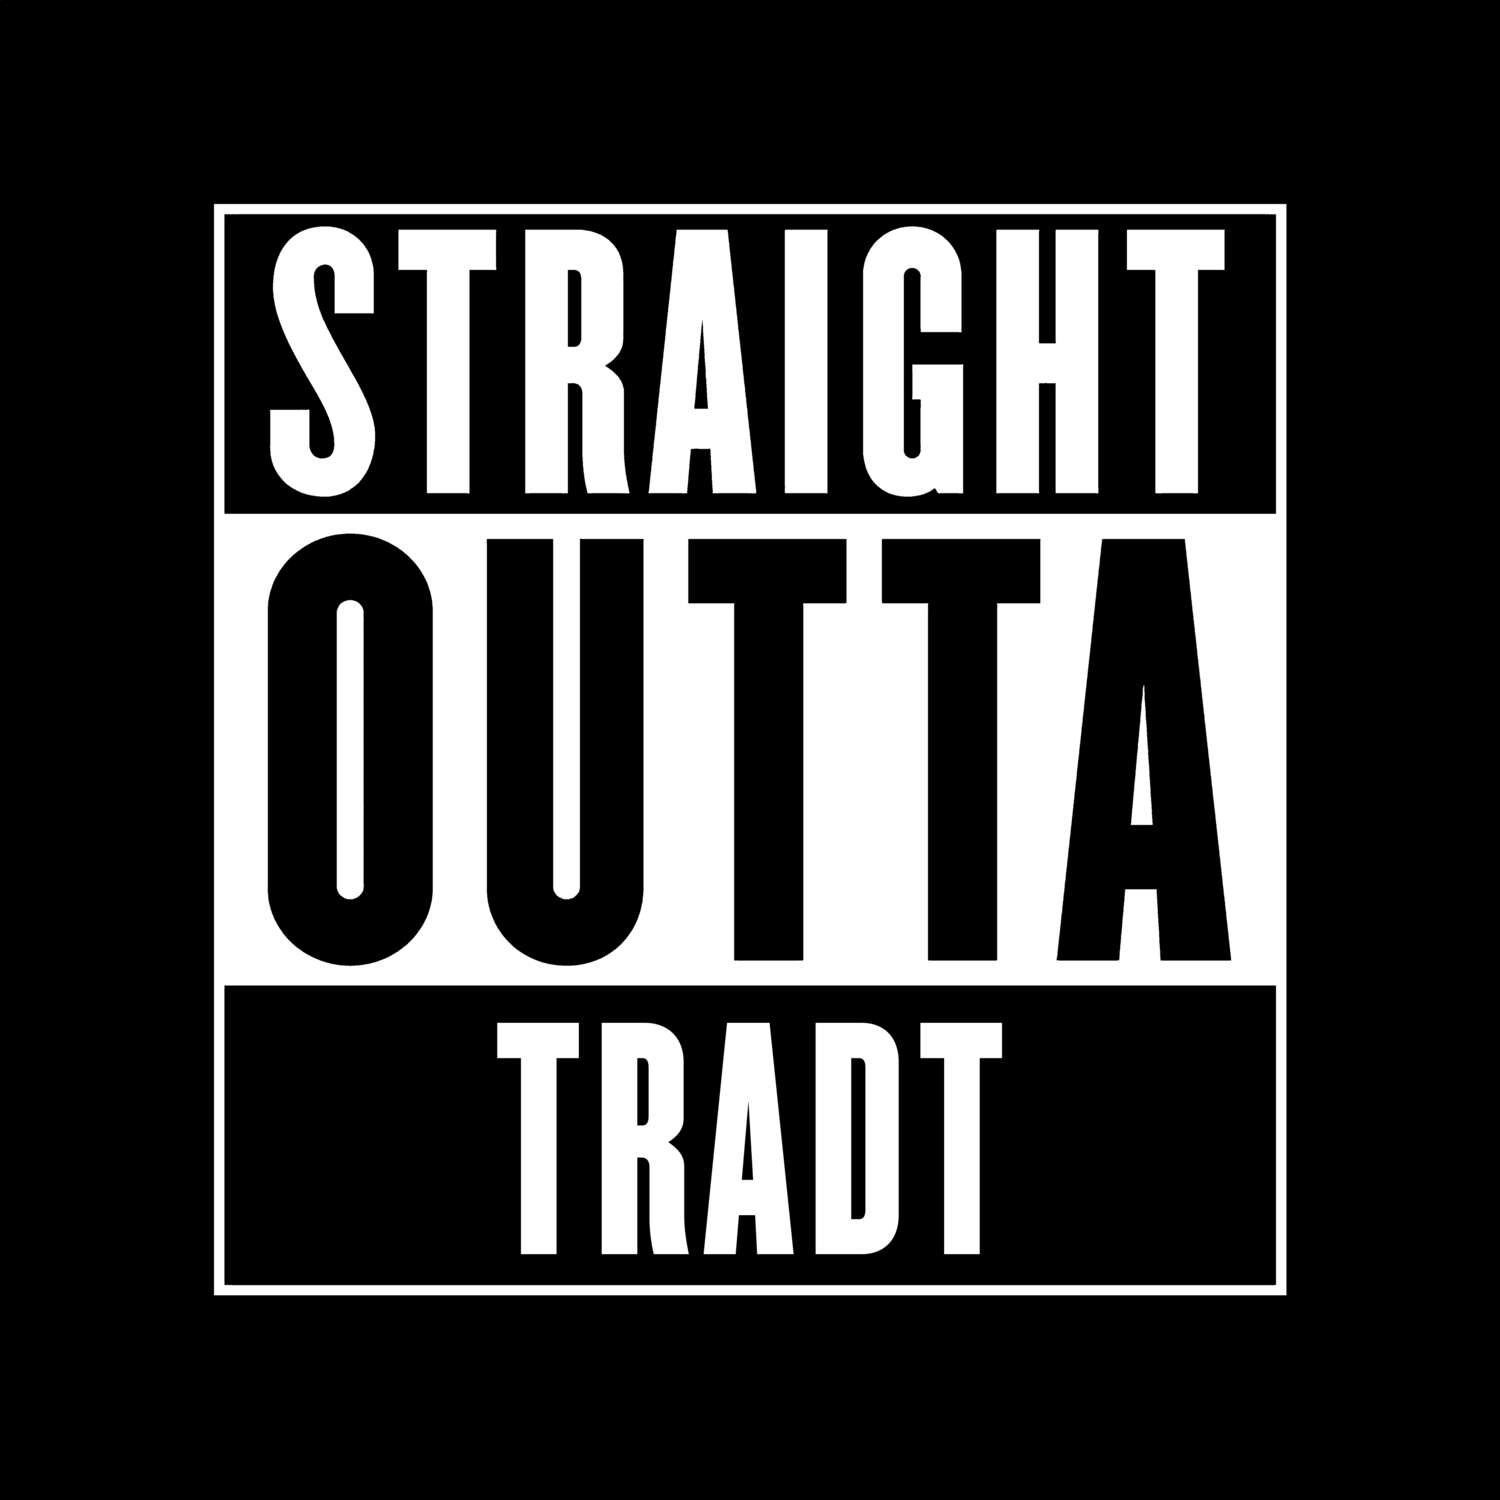 Tradt T-Shirt »Straight Outta«